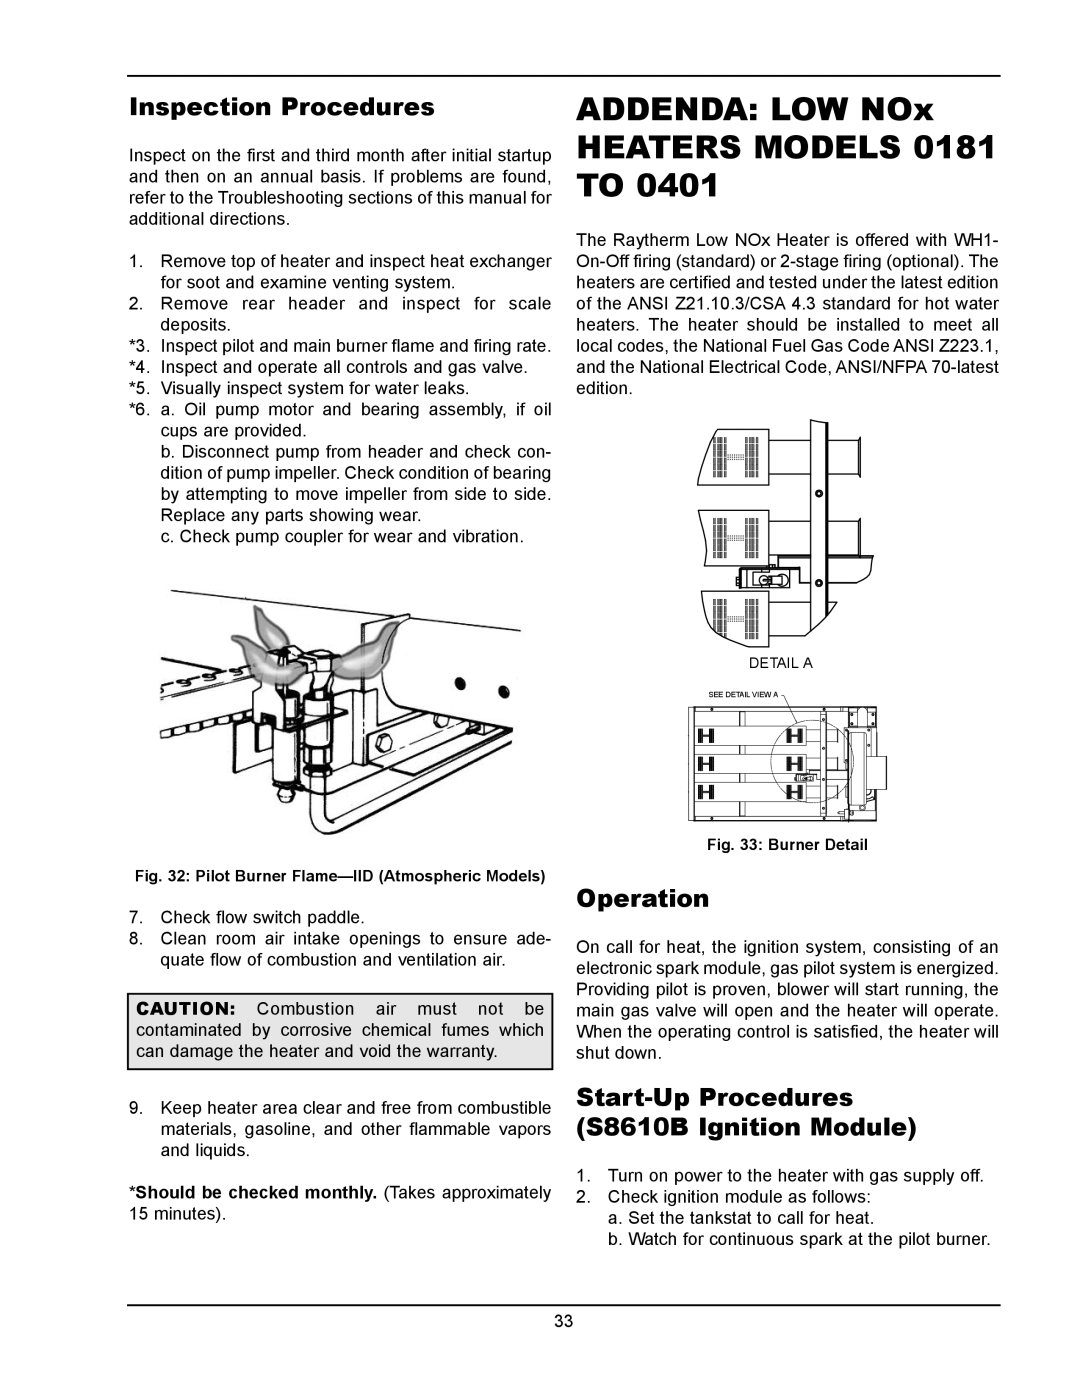 Raypak 1334001 operating instructions ADDENDA LOW NOx HEATERS MODELS 0181 TO, Inspection Procedures, Operation 